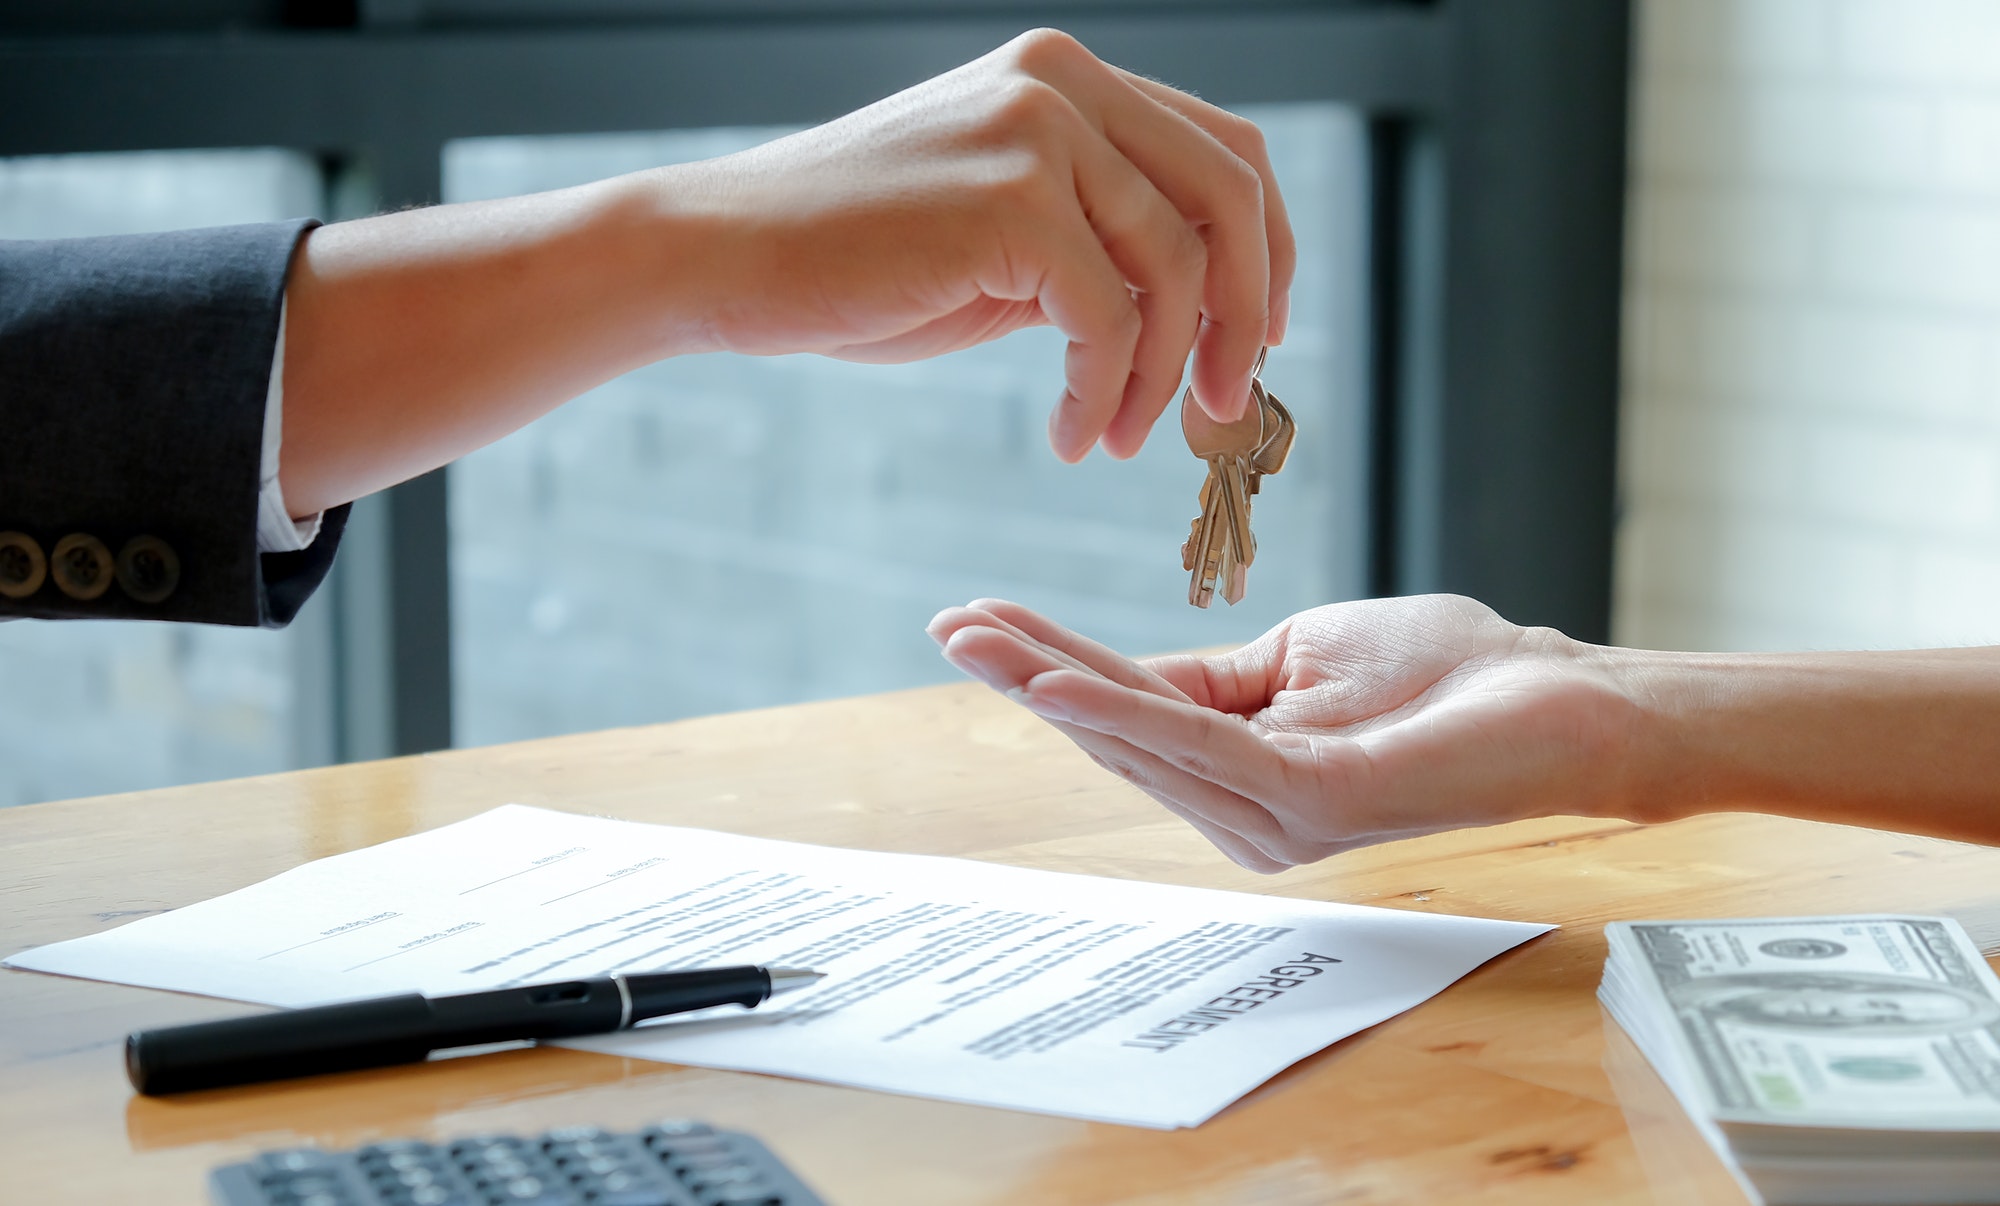 The house broker sends the keys to the customer after signing the contract to buy the house.